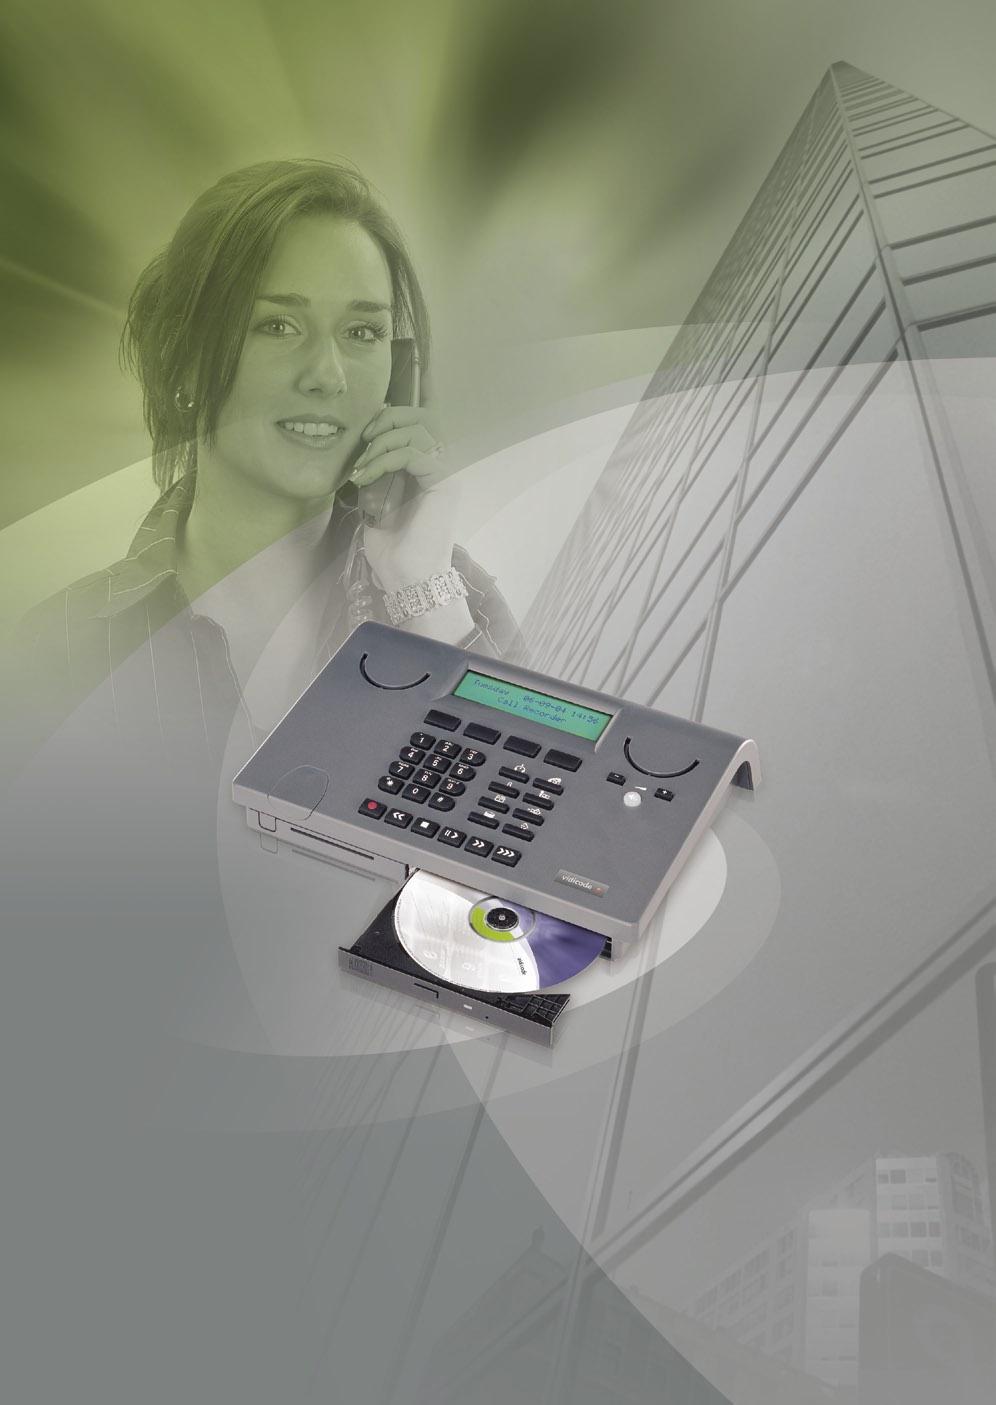 Single Flash CD 300 HD 9900 Call Recorder for desktop use Can be connected to any